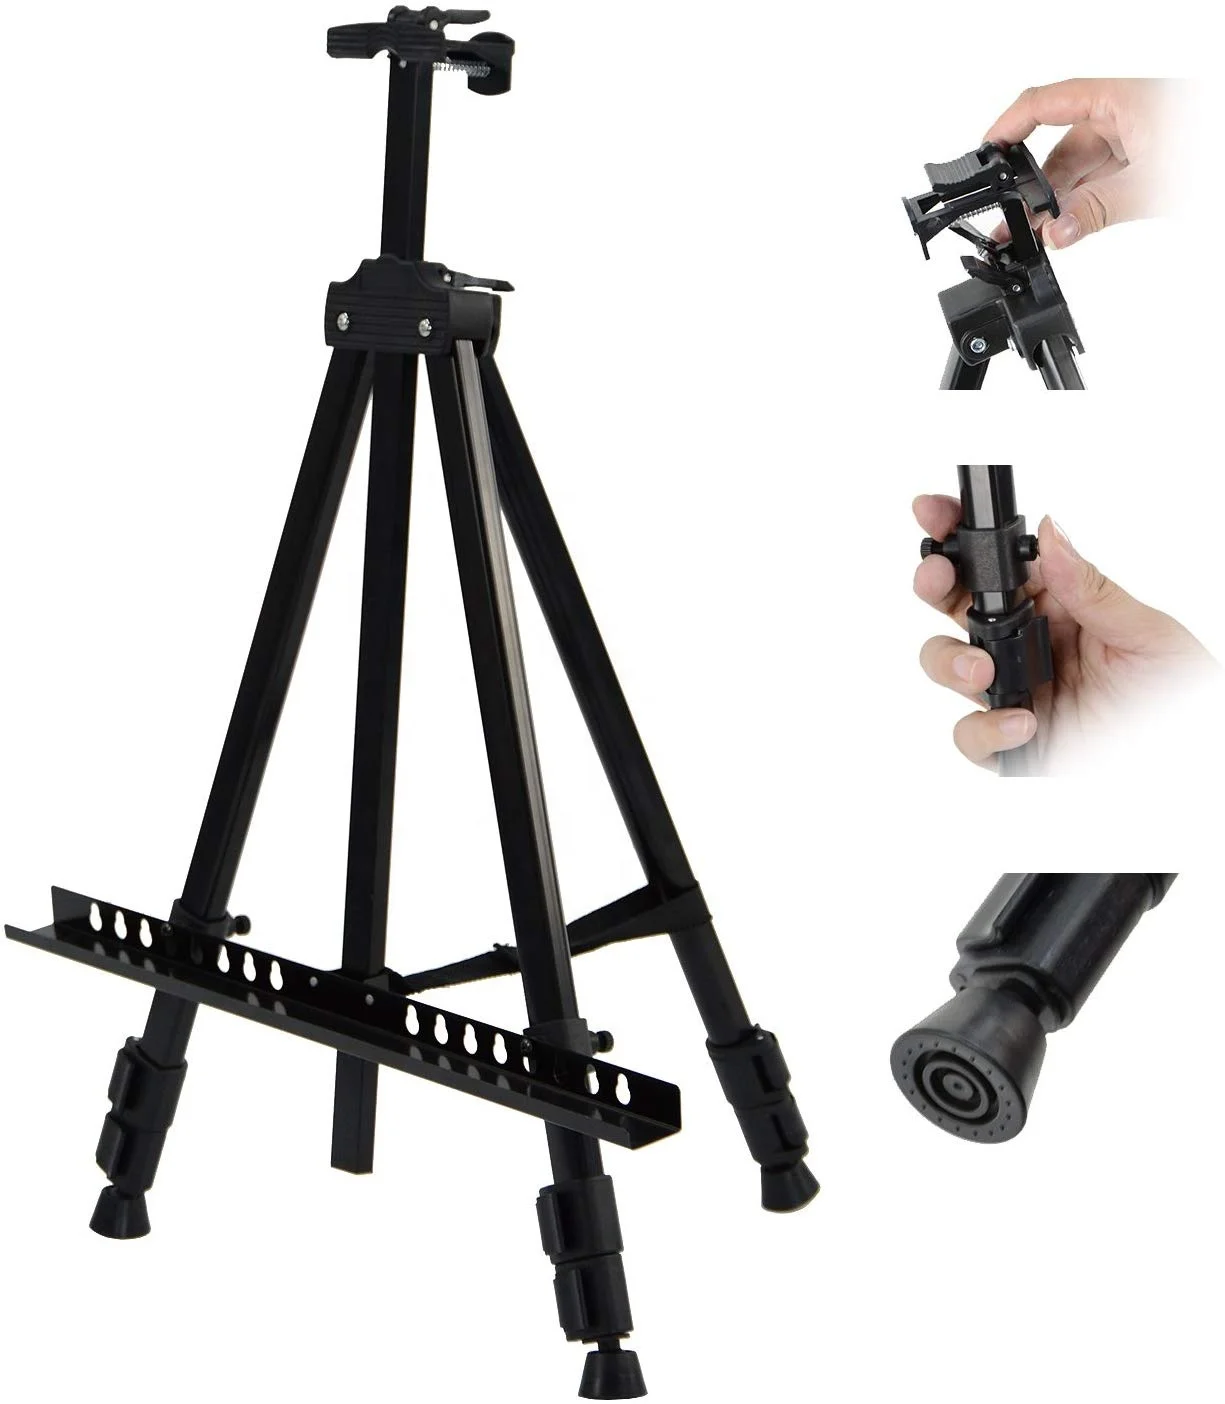 66 Inches Adjustable height Artist Painting Drawing Displaying Tripod Field Metal Aluminum Easel for Table-Top/Floor/Flip Charts